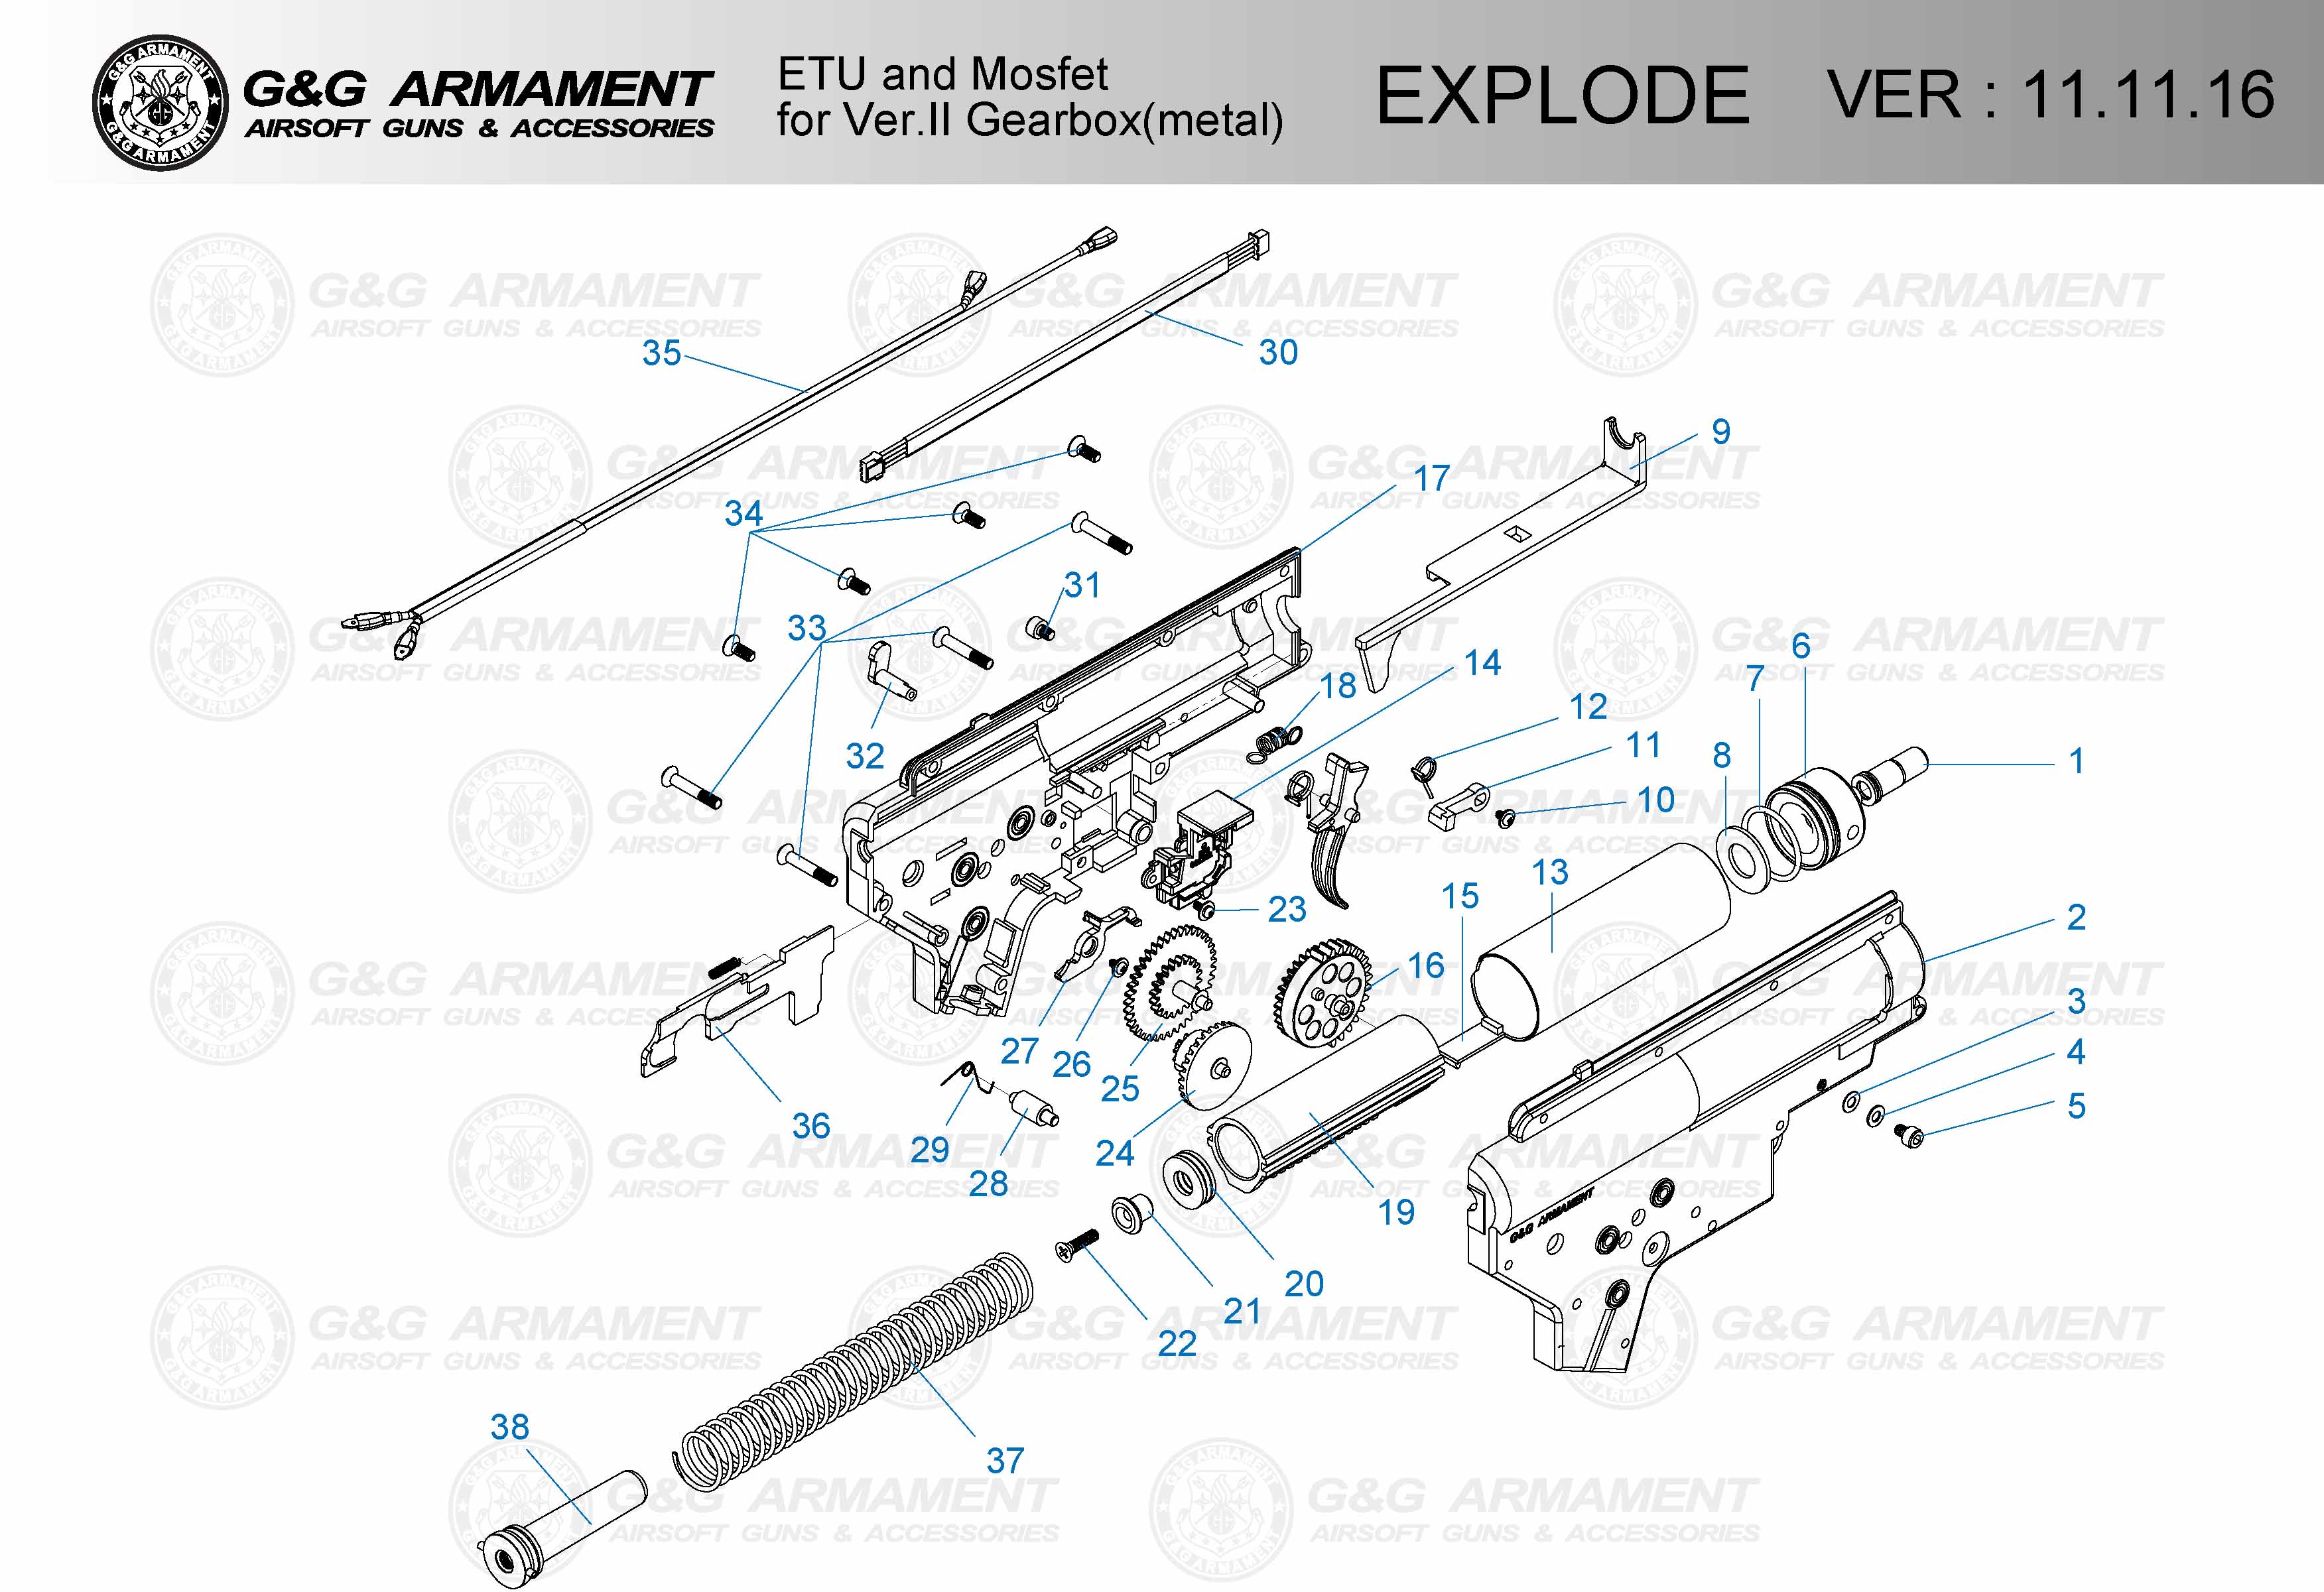 Spare part Part#24 (ARP556 GB) - Bevel Gear for ARP556 - G&G